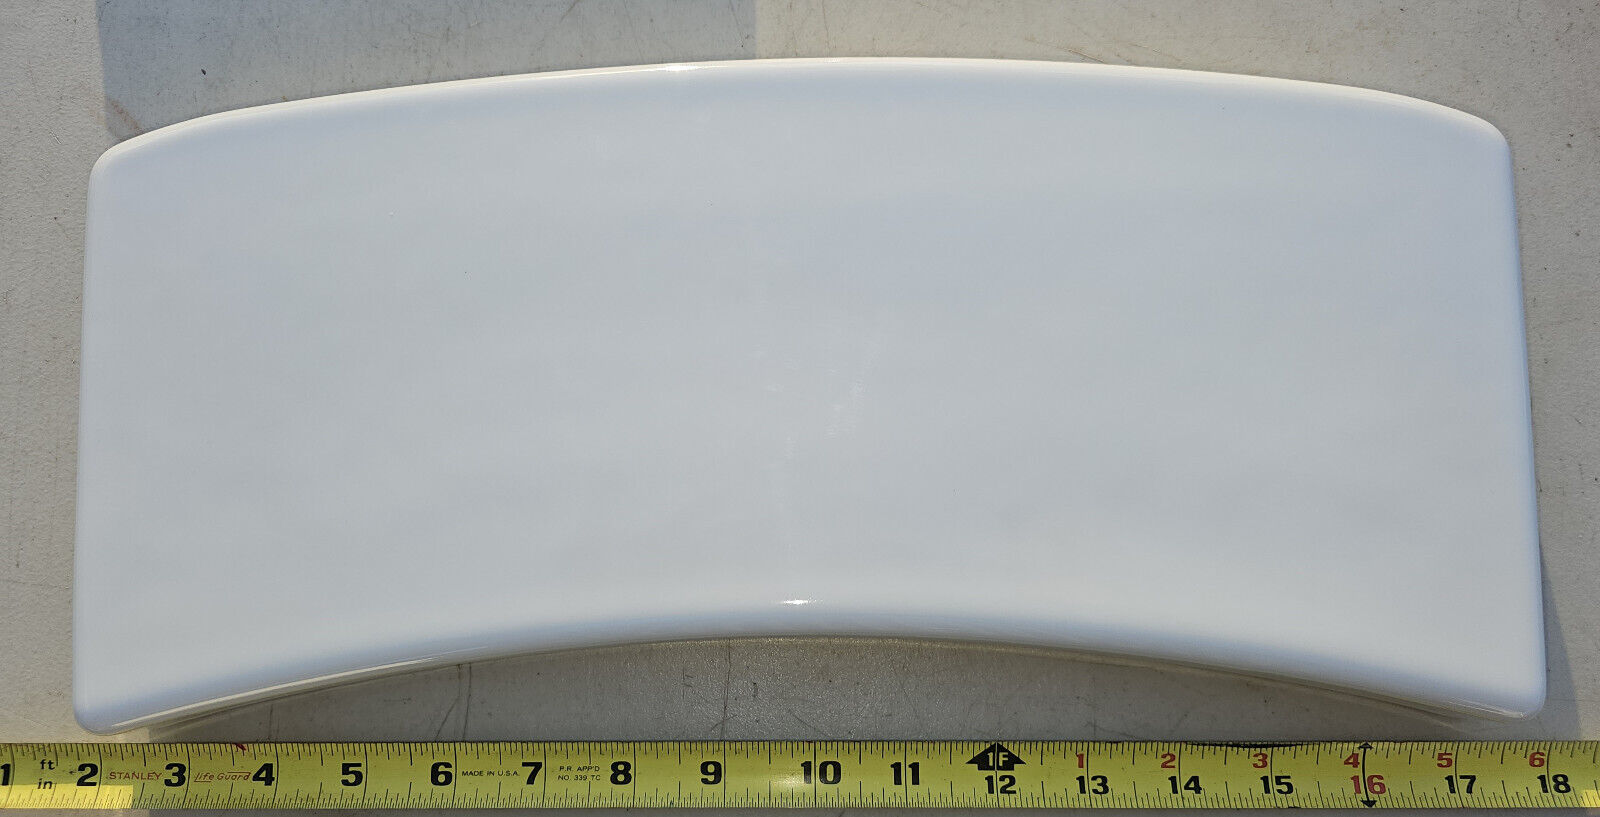 Primary image for 24II54 KOHLER TOILET TANK LID, WHITE, CONCAVE FRONT, 16" X 7-1/4" OVERALL, #2786